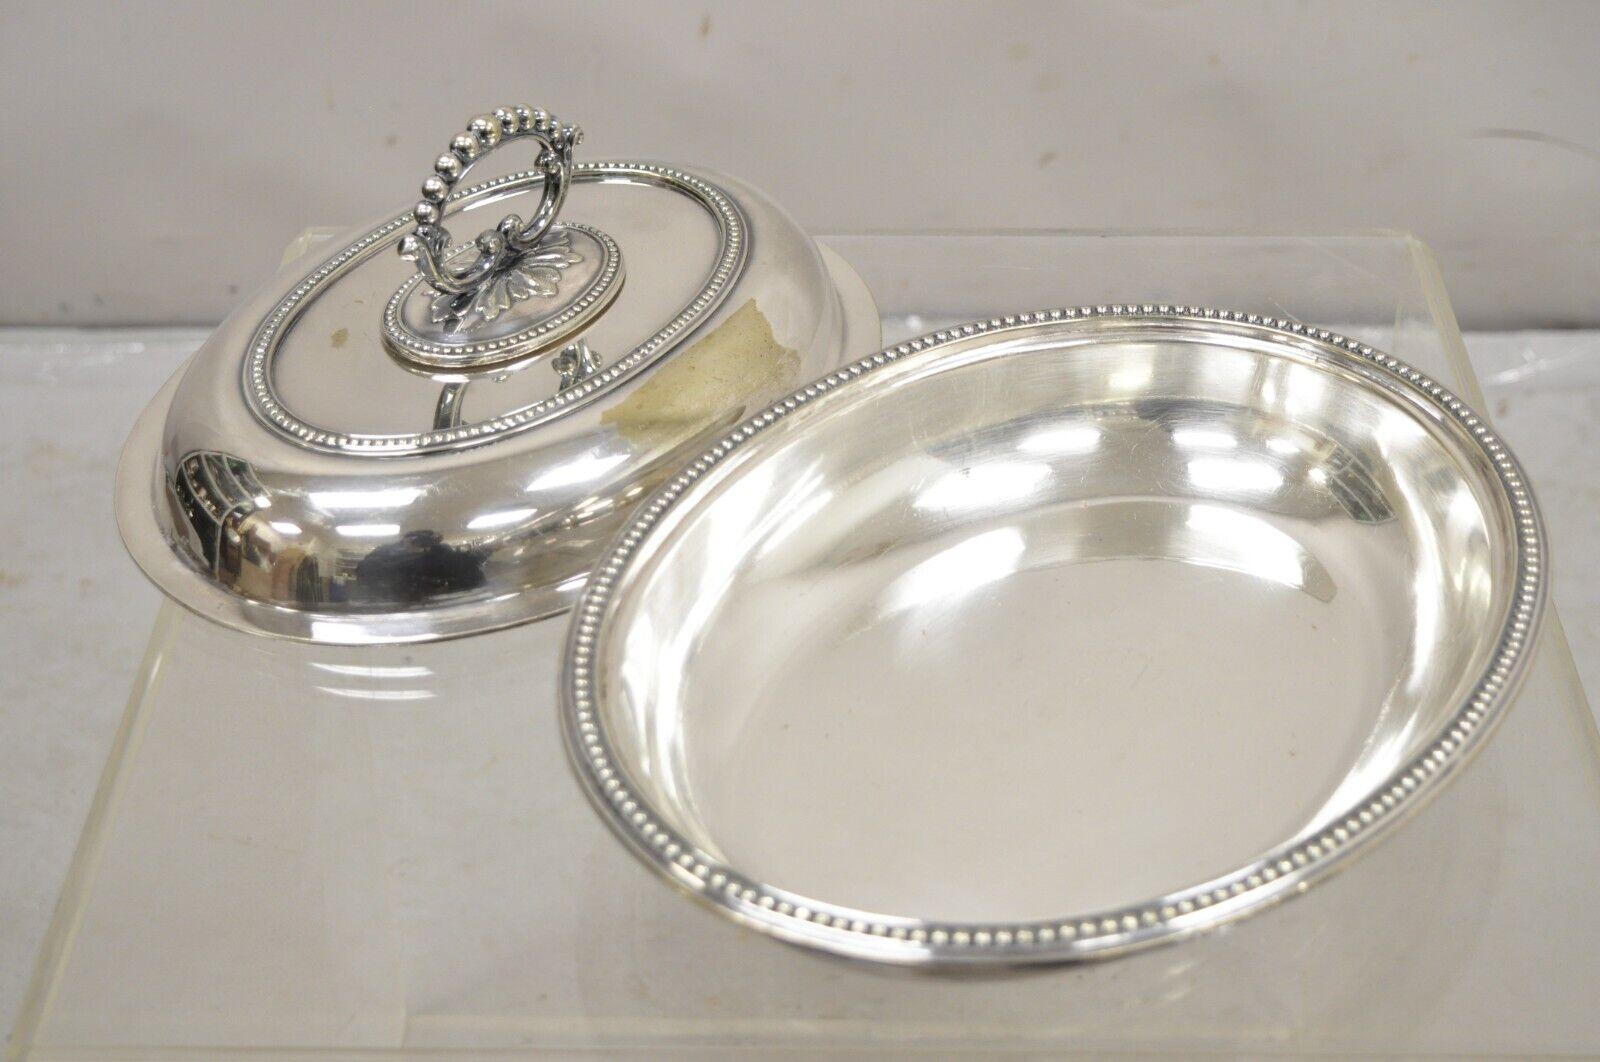 Mappin & Webb's Prince's Plate English Sheffield Silver Plated Covered Dish (Plat couvert en argent) en vente 2